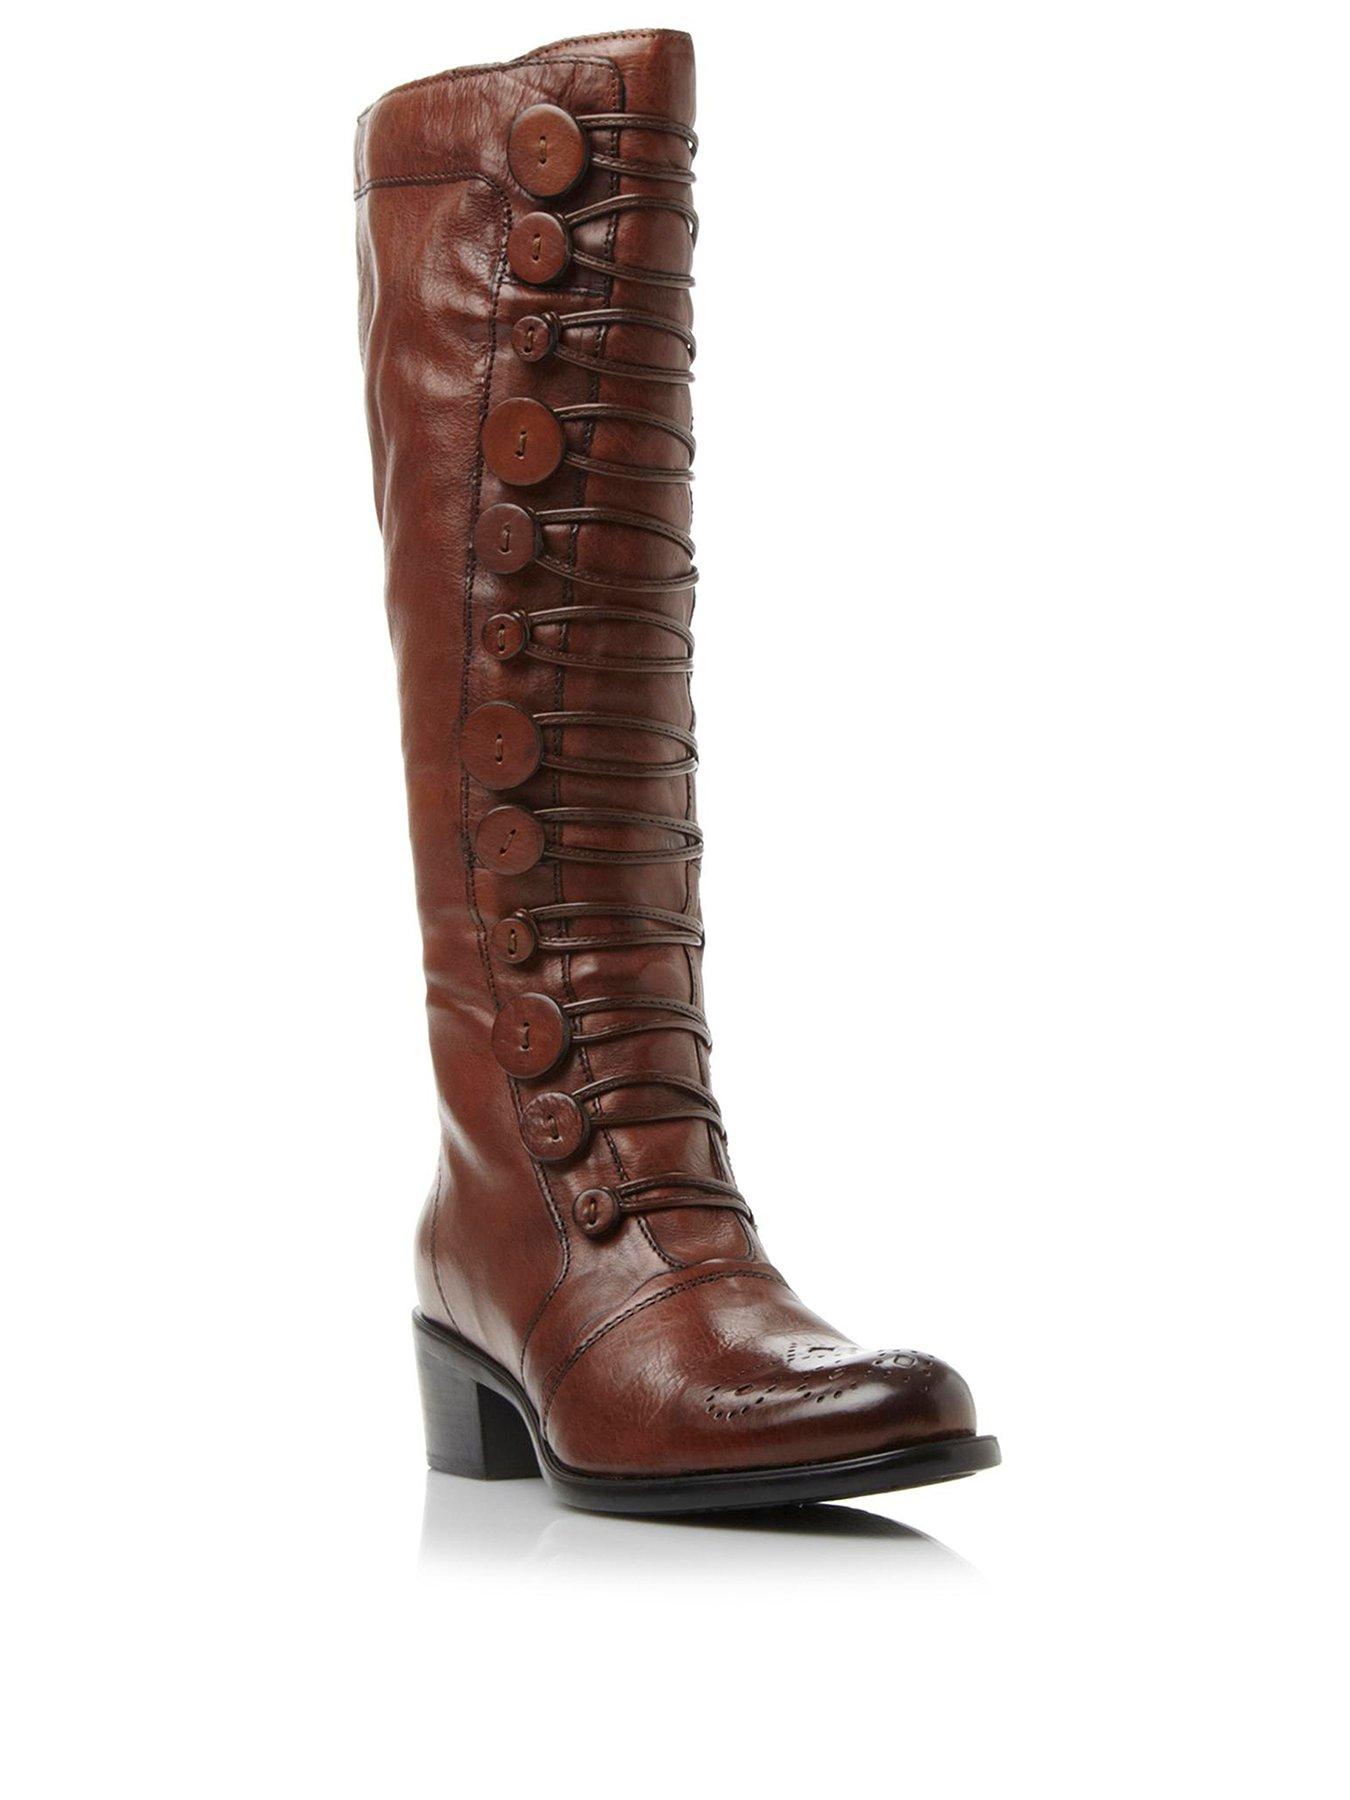  Pixied Button Detail Leather Knee High Boot - Tan